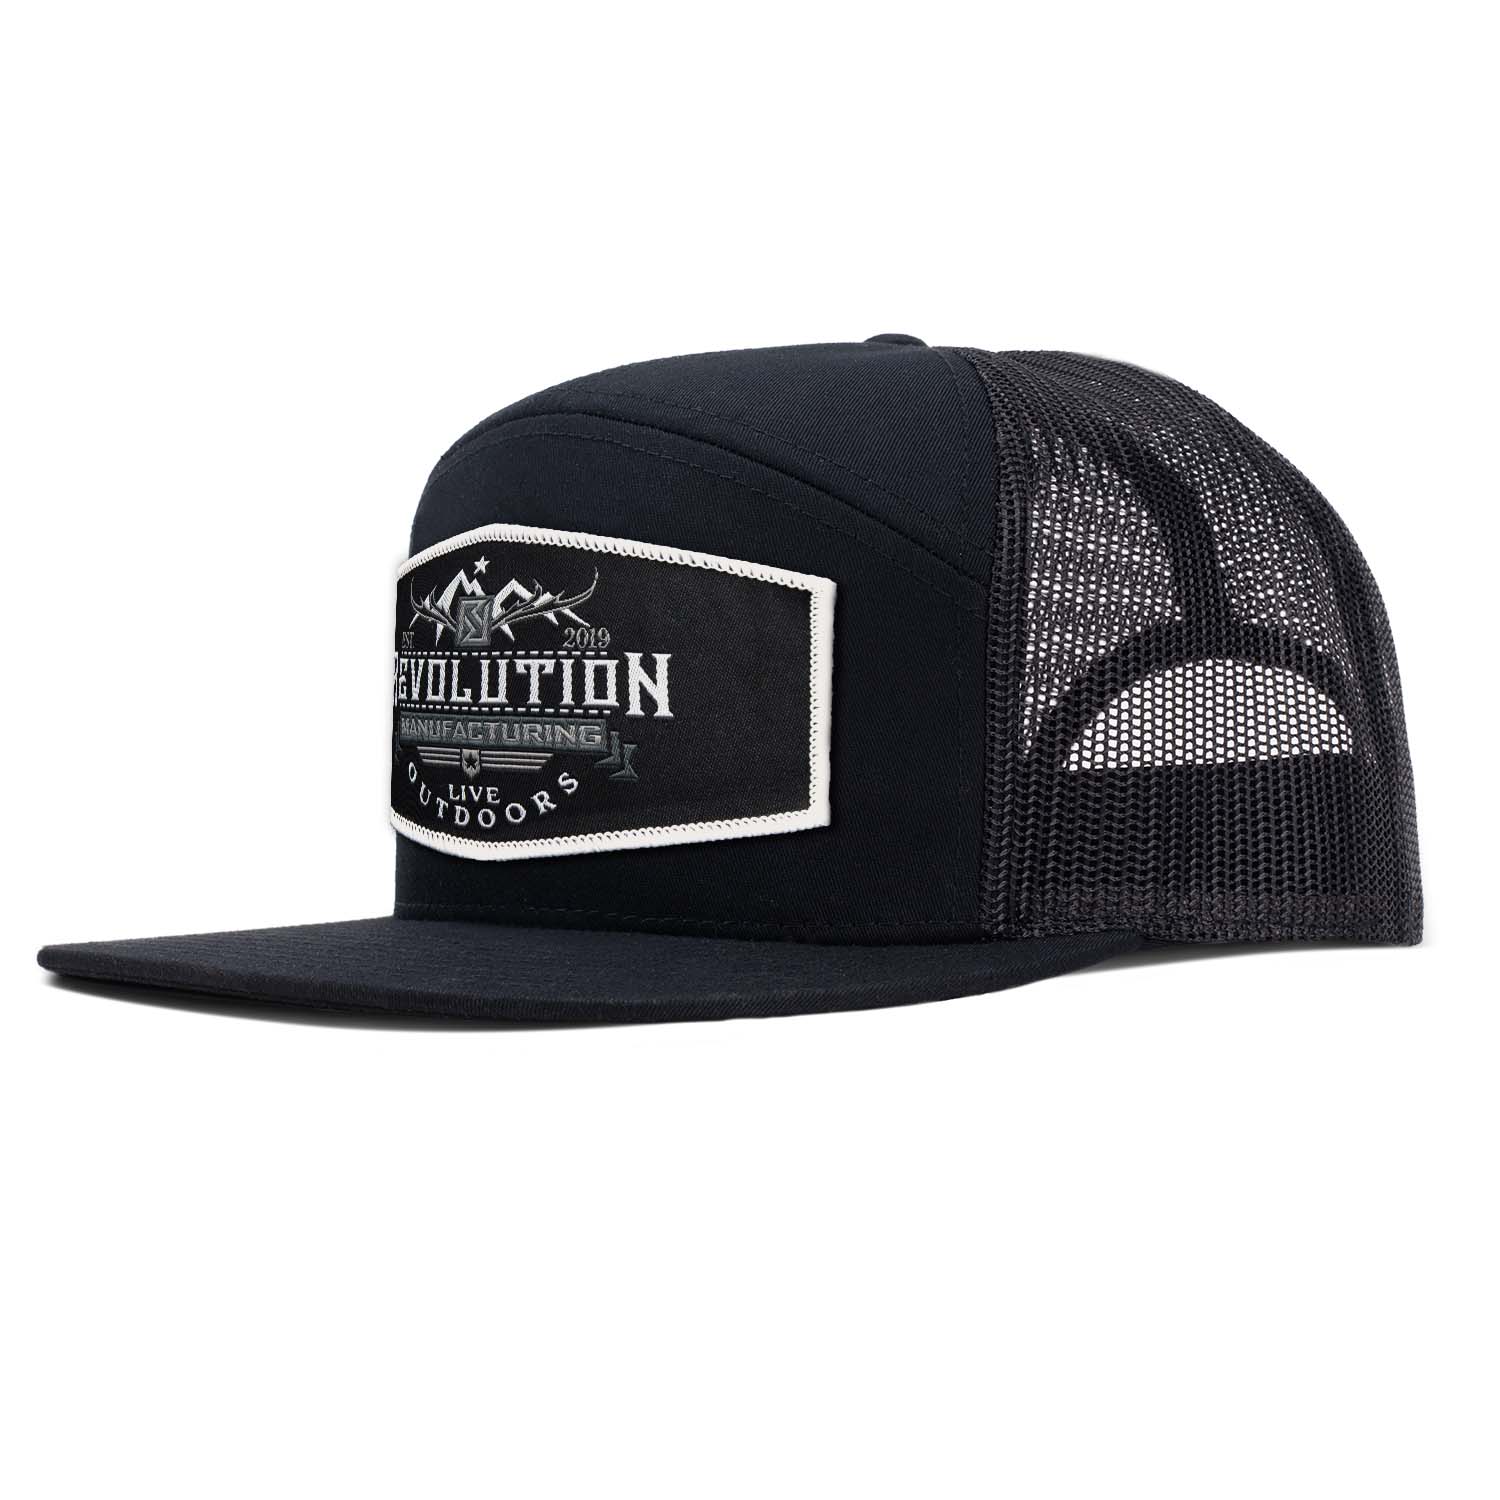 All black 7 panel flat bill trucker hat with Revolution Mfg Live Outdoors woven black patch with white border